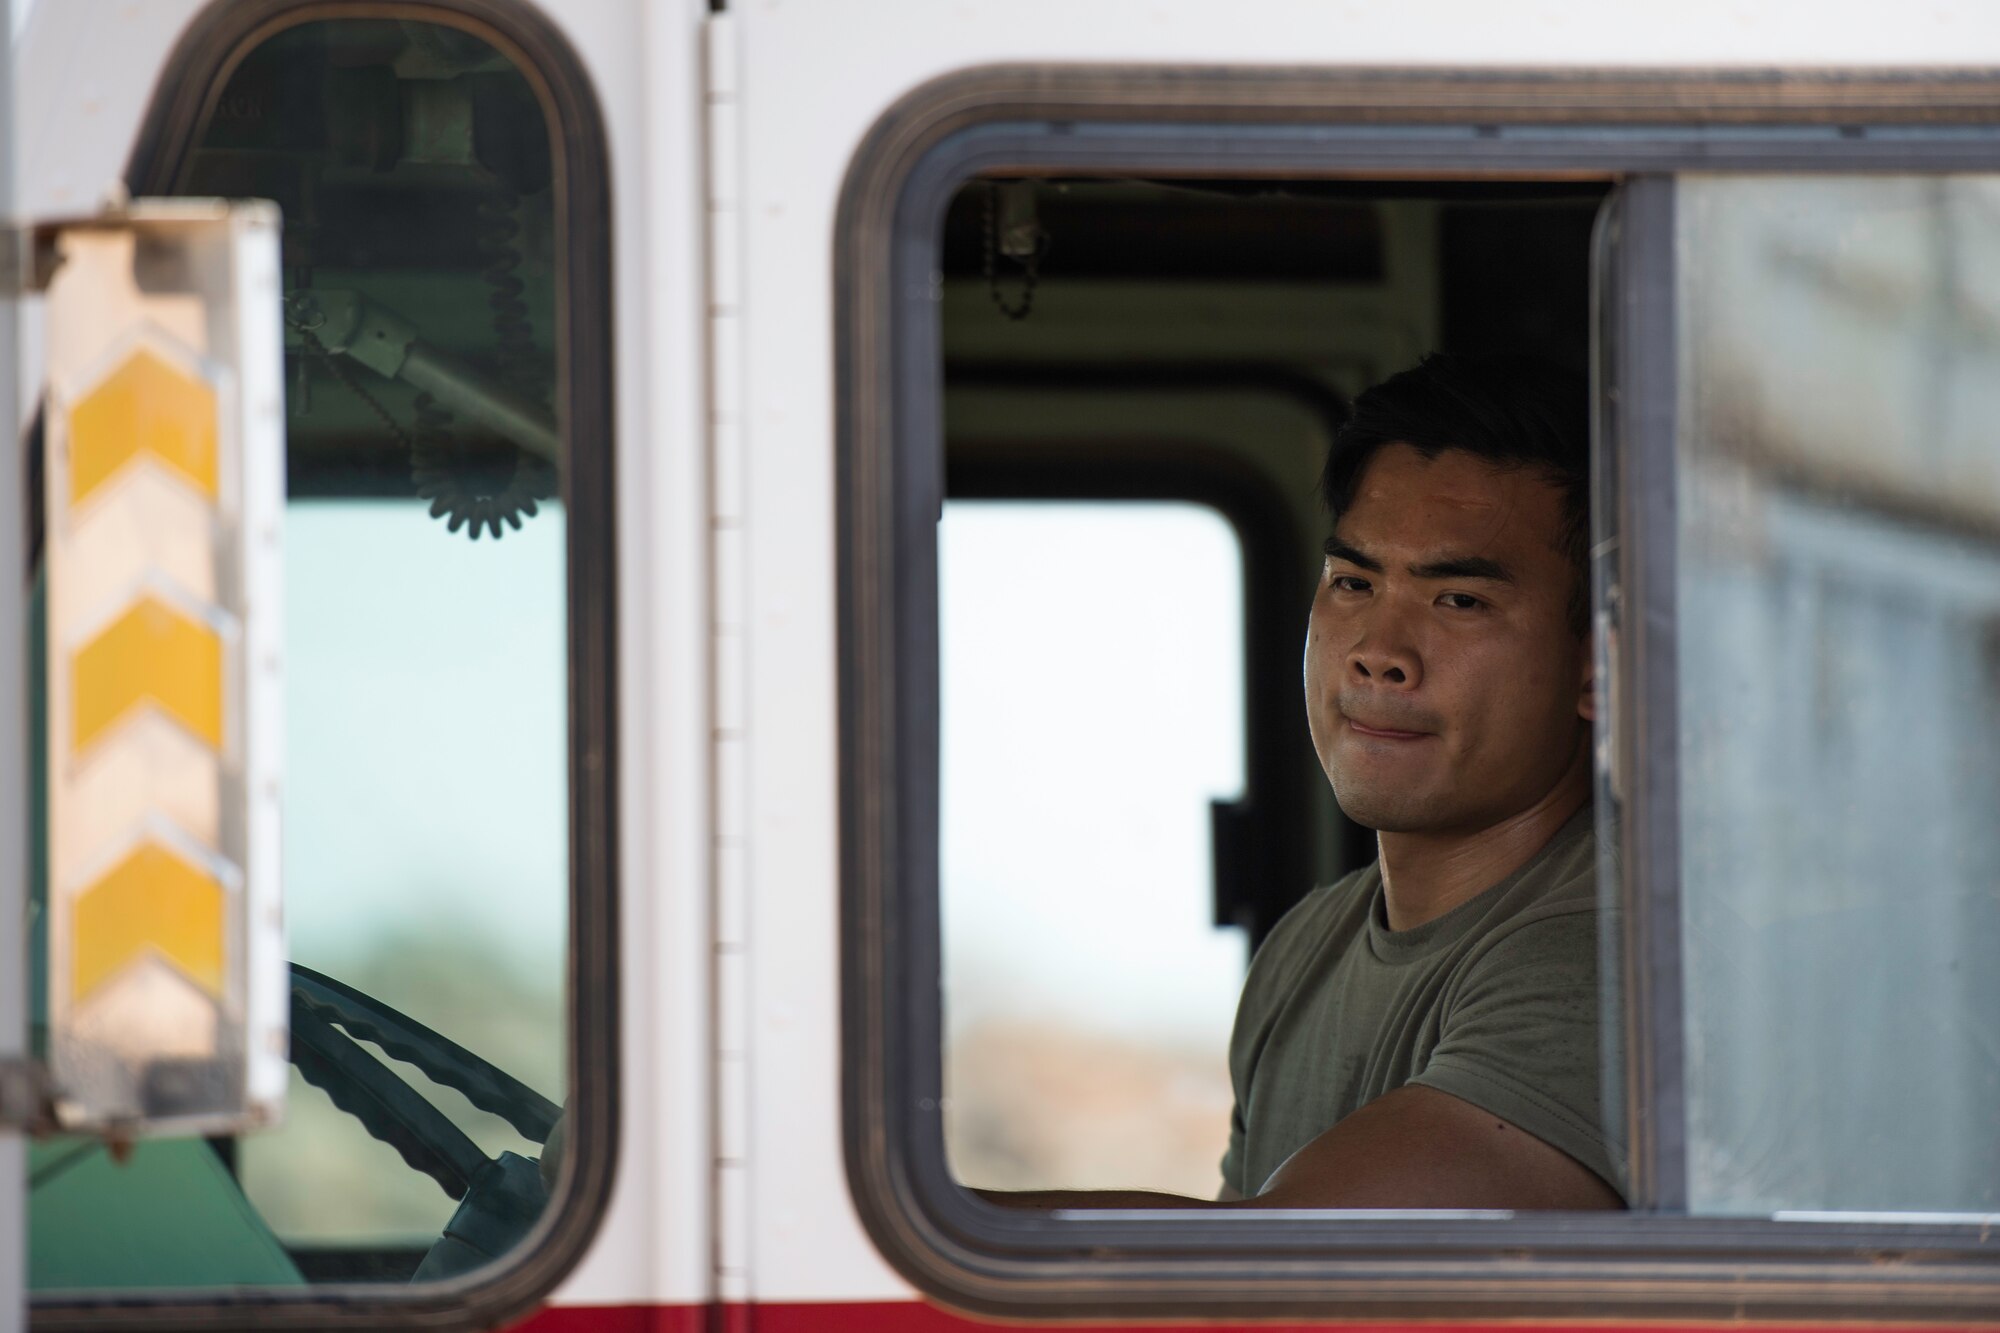 U.S. Air Force Airman 1st Class Anthon Williams, 870th Air Expeditionary Squadron firefighter, steers a fire truck at Chabelley Airfield, Djibouti, June 11, 2019. Due to the extreme temperatures in East Africa, the firefighters often perform their training early in the morning. (U.S. Air Force photo by Staff Sgt. Devin Boyer)